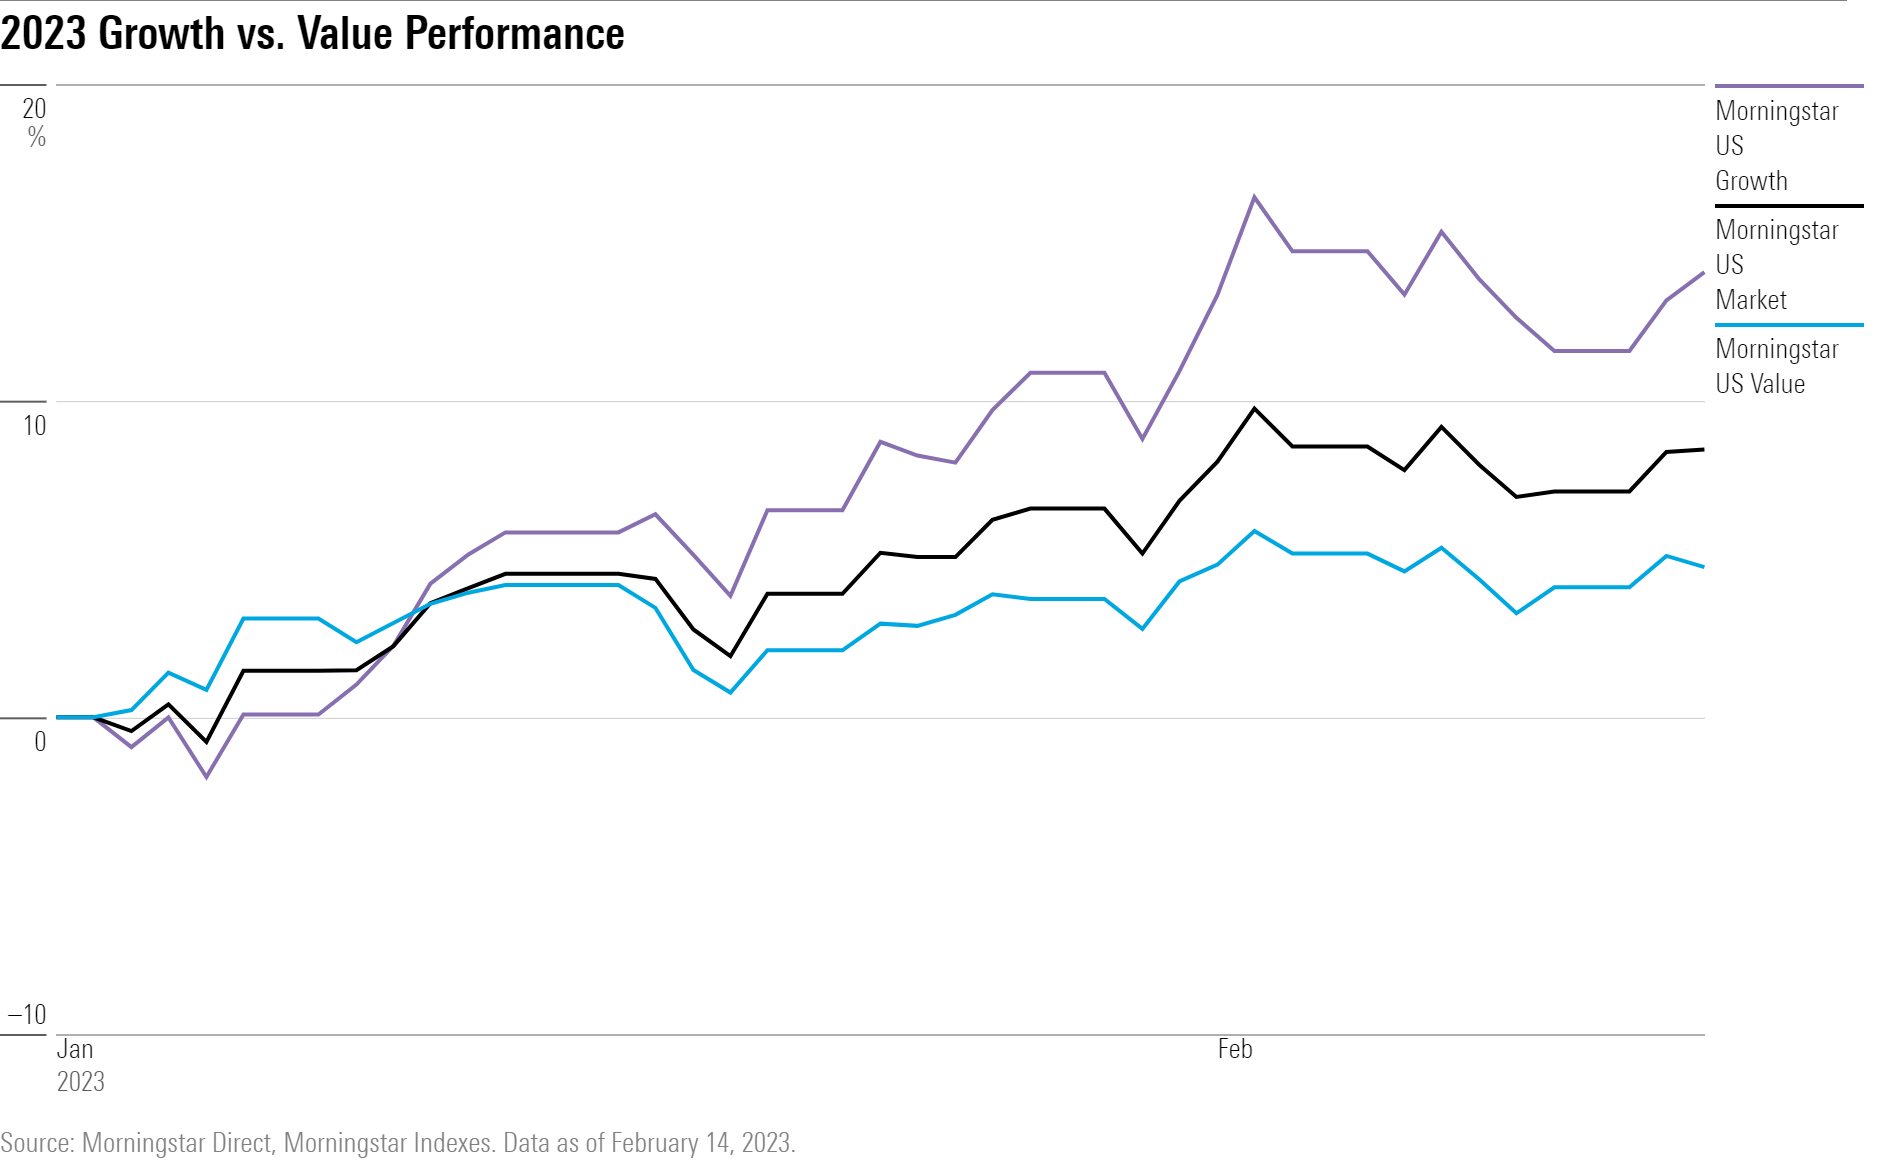 2023 performance for the Morningstar US Growth vs. Morningstar US Value indexes and the Morningstar US Market Index.